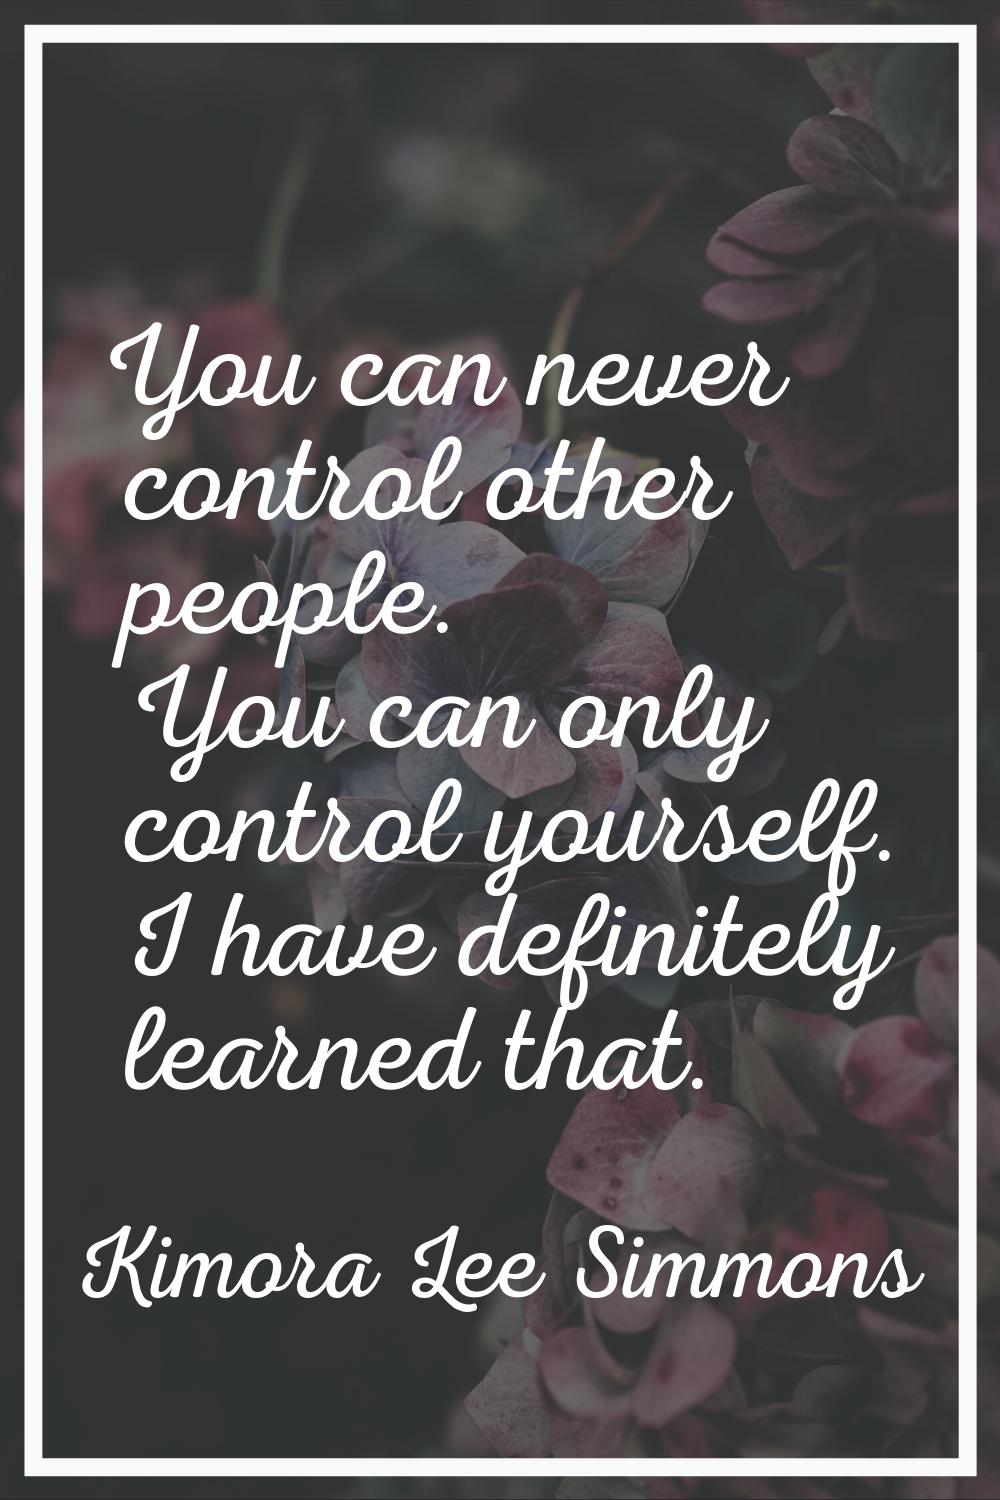 You can never control other people. You can only control yourself. I have definitely learned that.